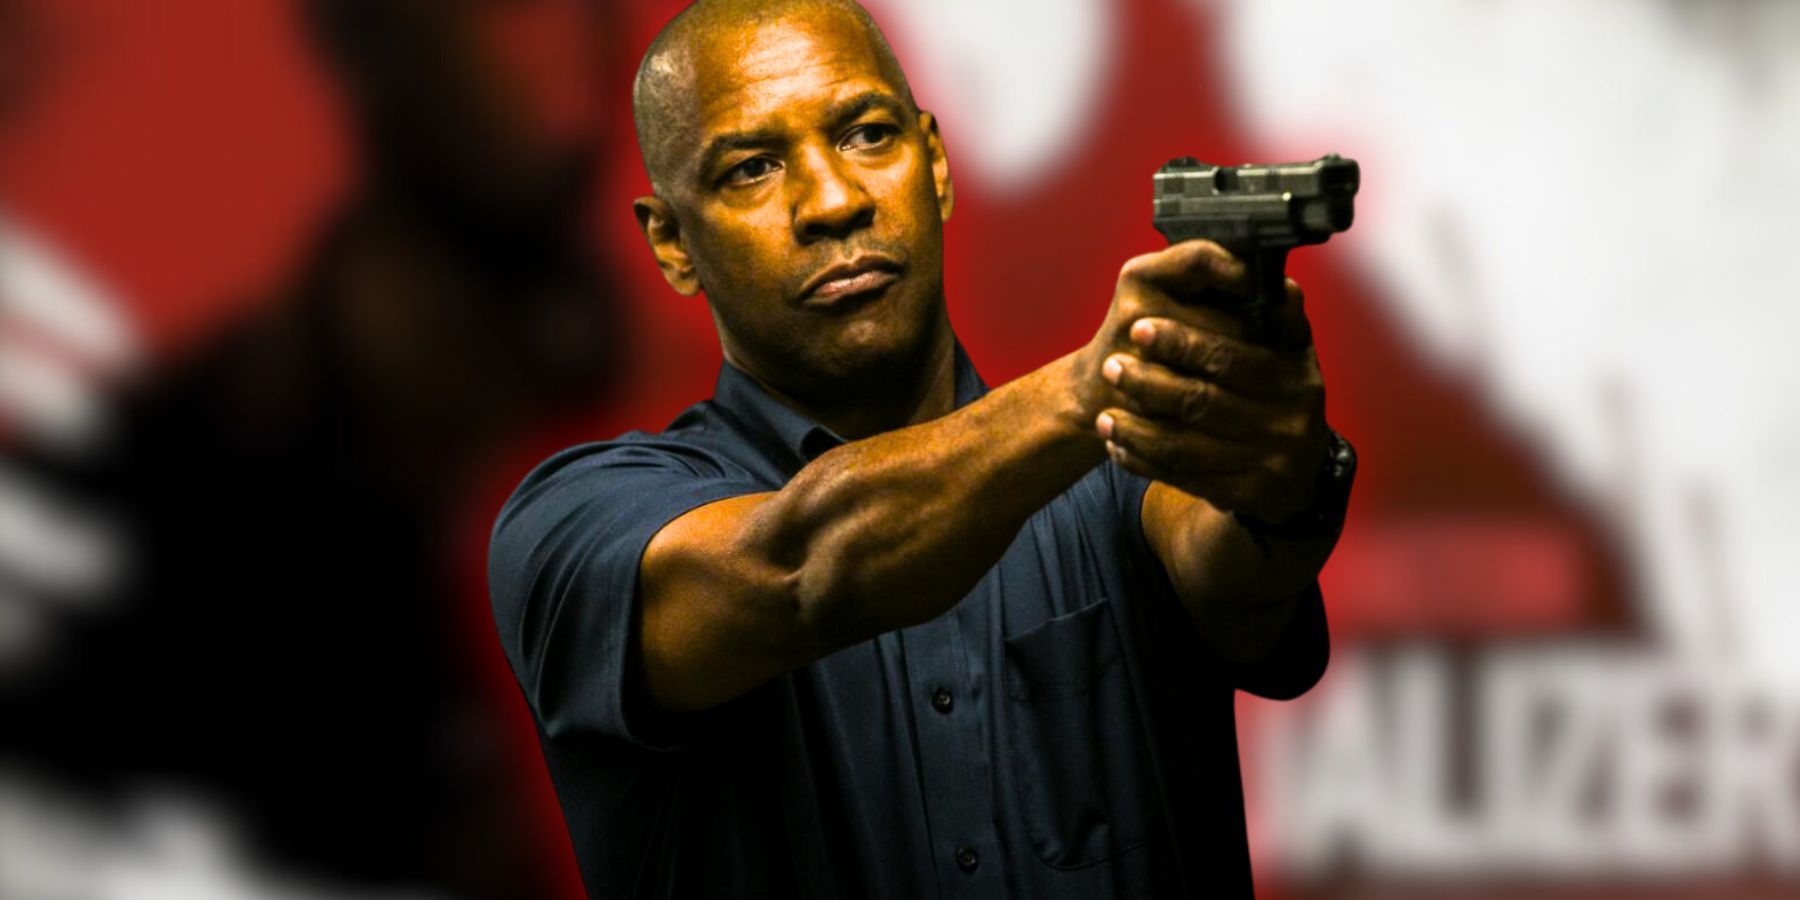 Denzel Washington in the Equalizer with blurred film poster